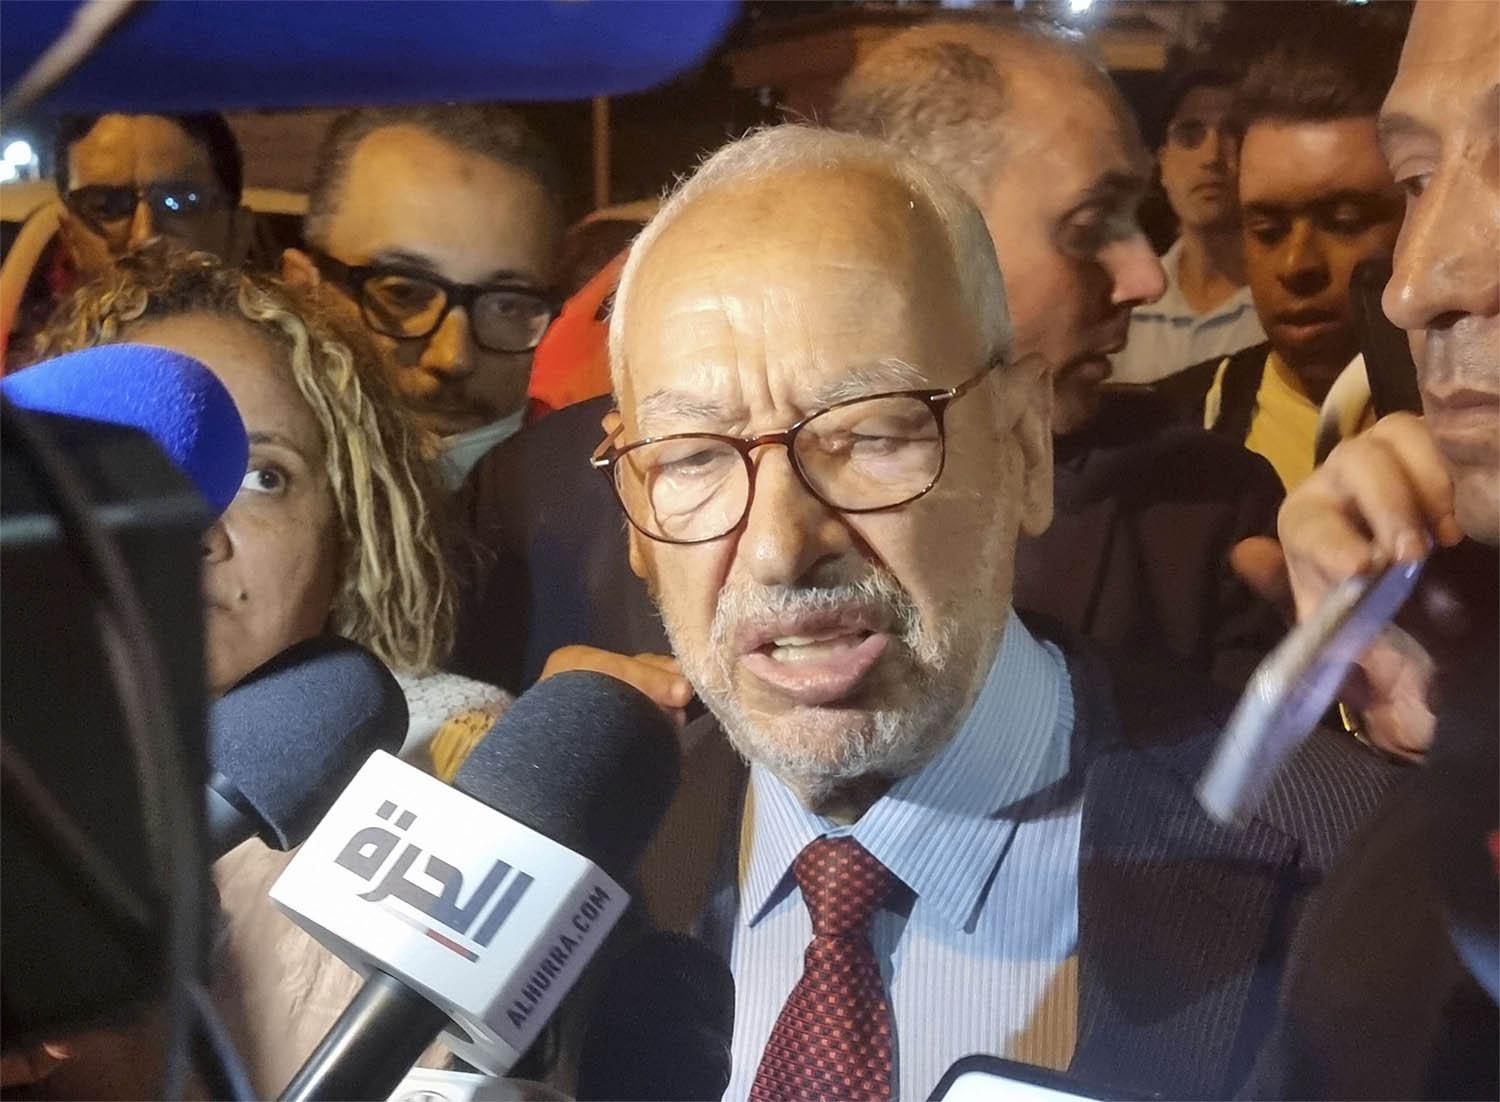 Ghannouchi is also being investigated for money laundering